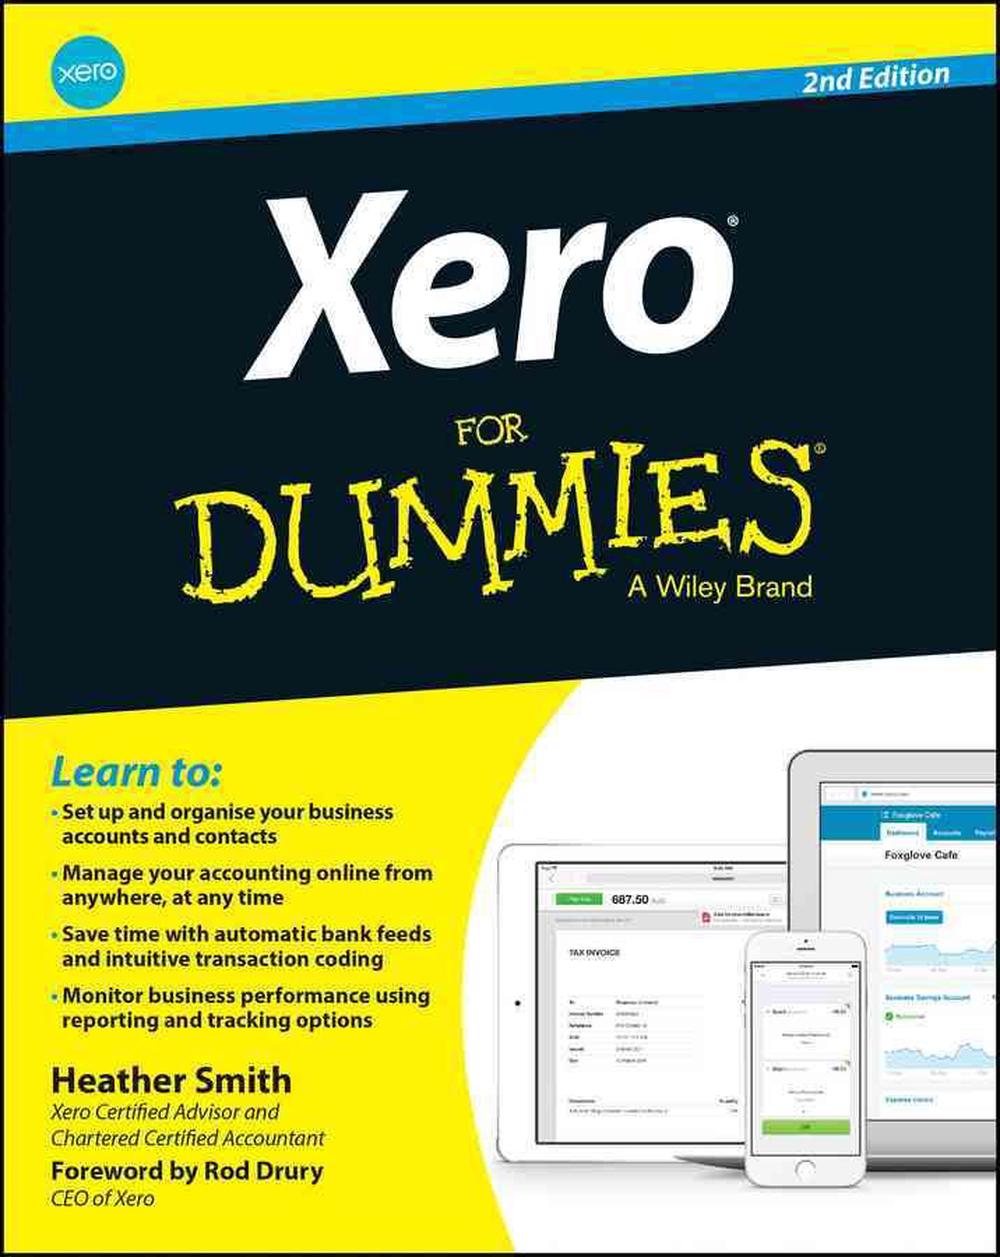 Xero for Dummies Second Edition by Heather Smith 